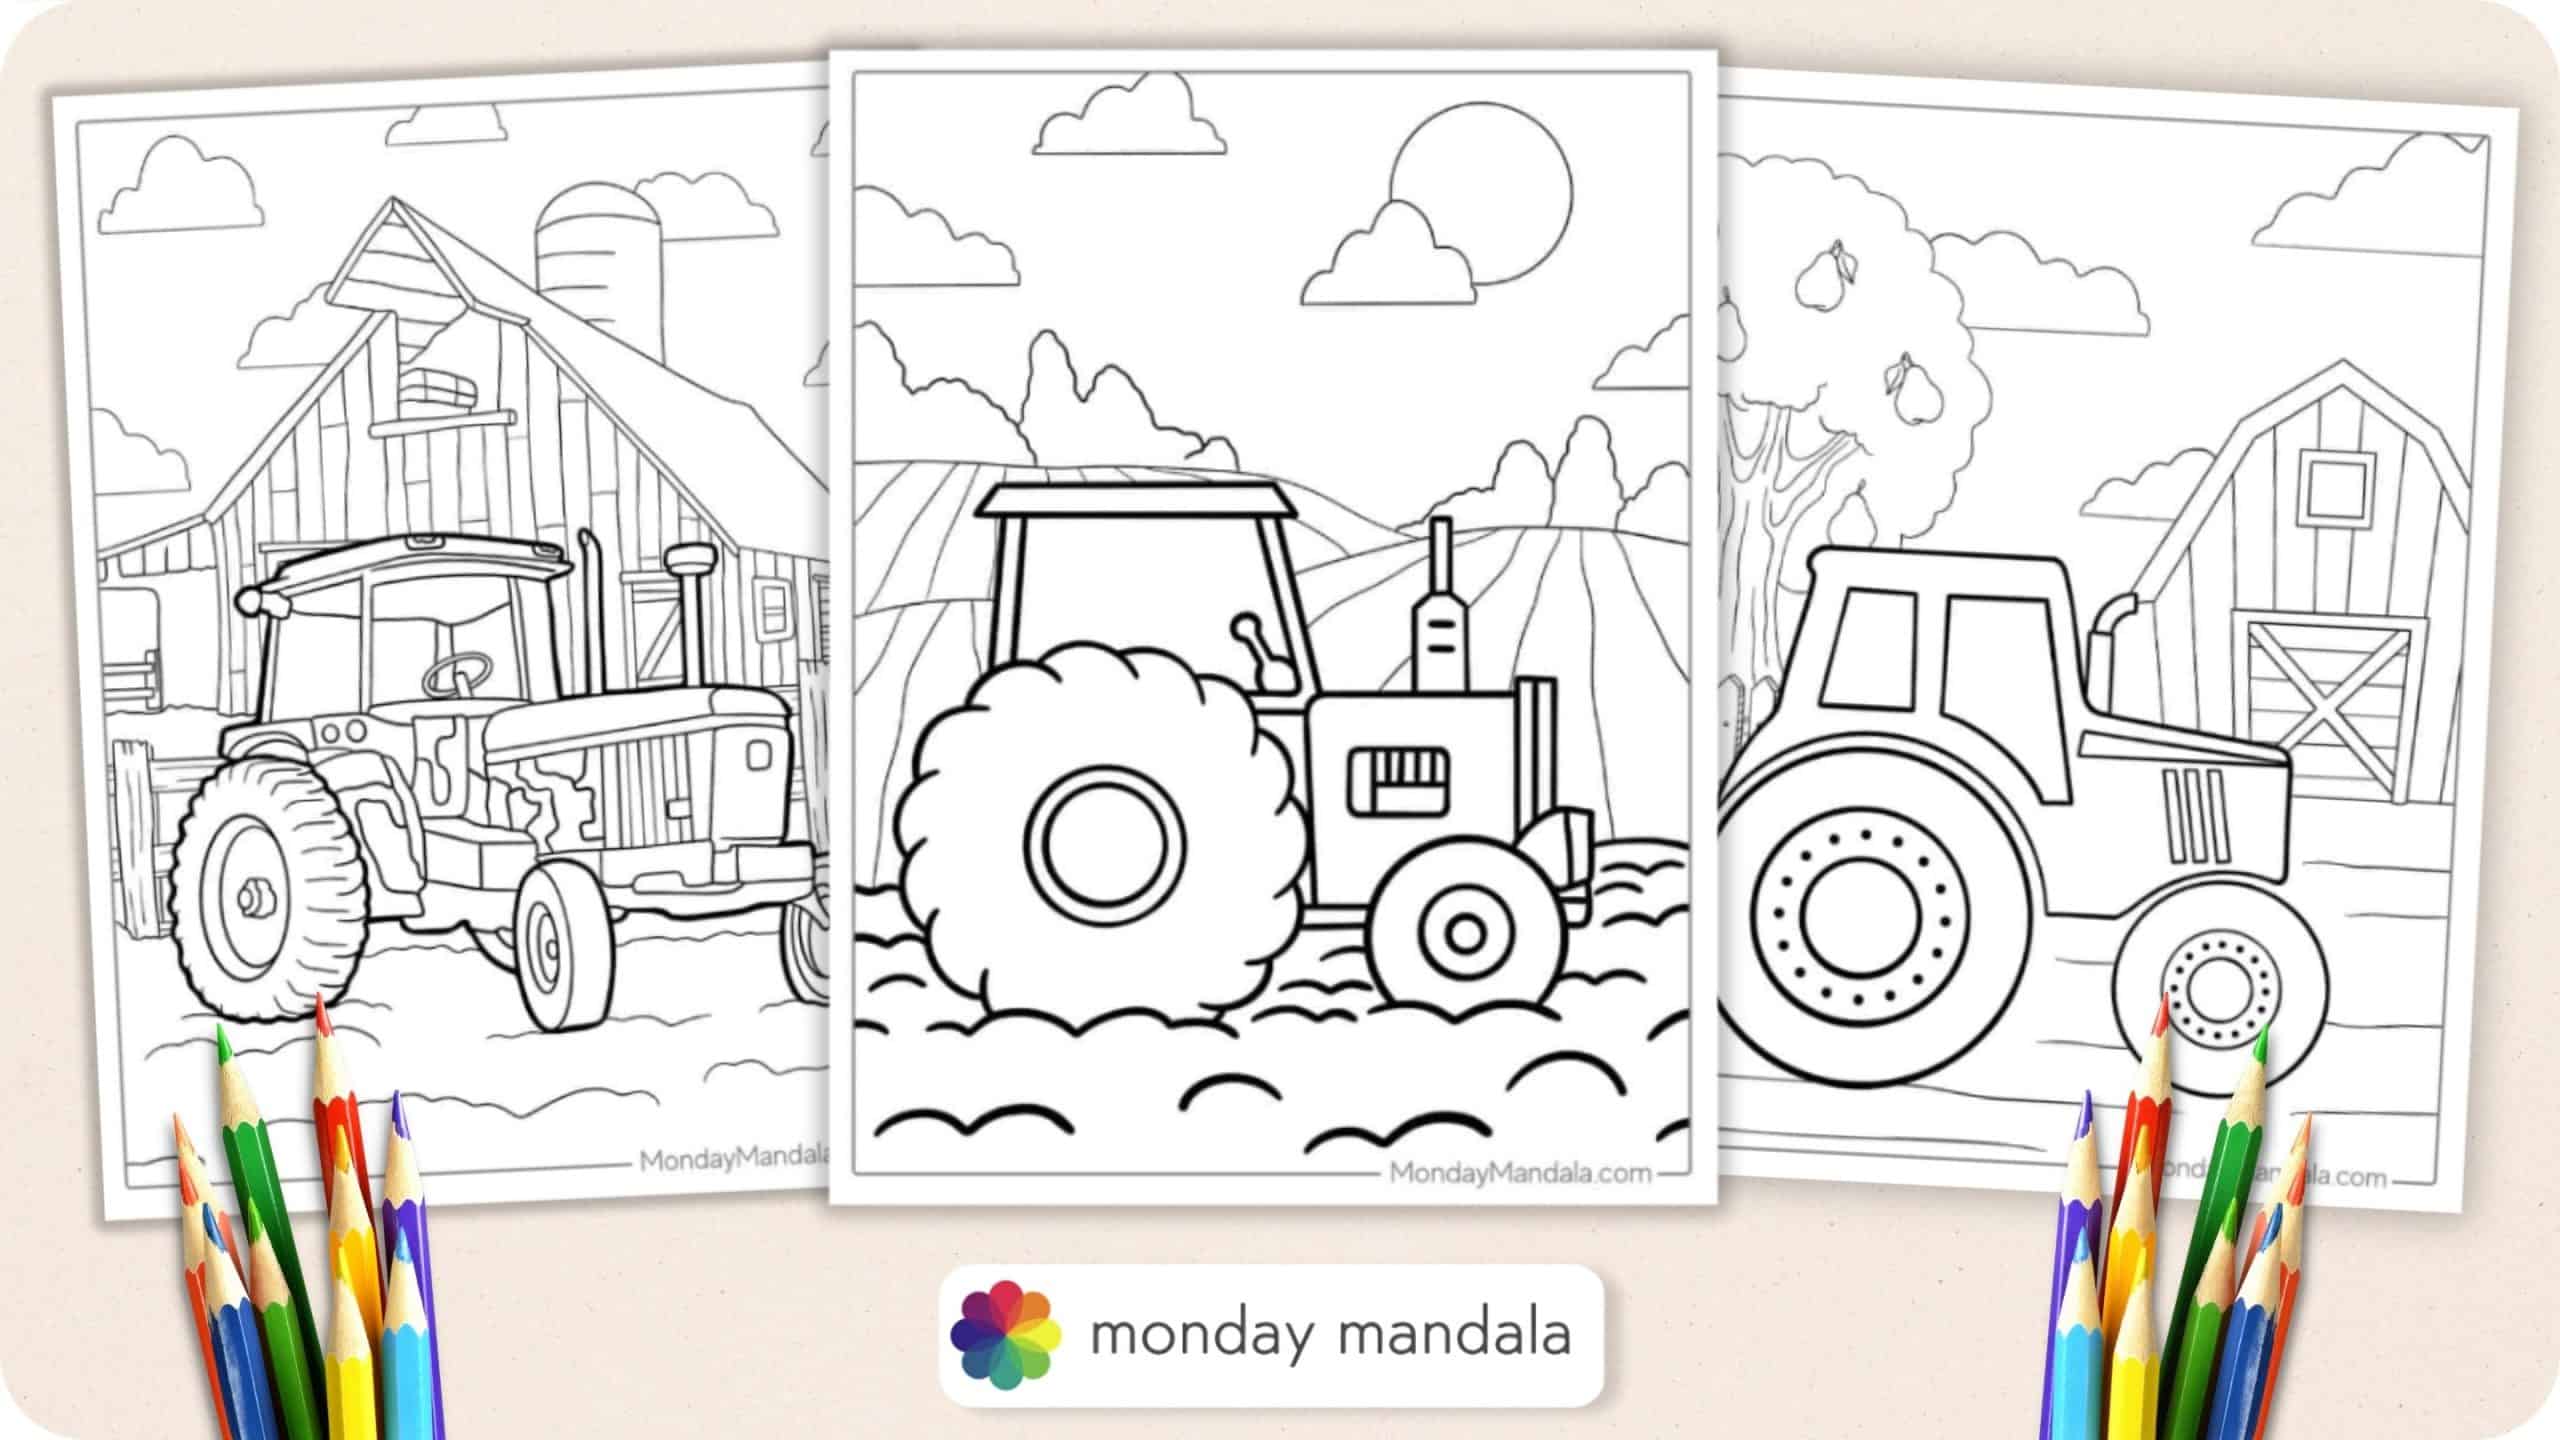 Tractor coloring pages free pdf printables